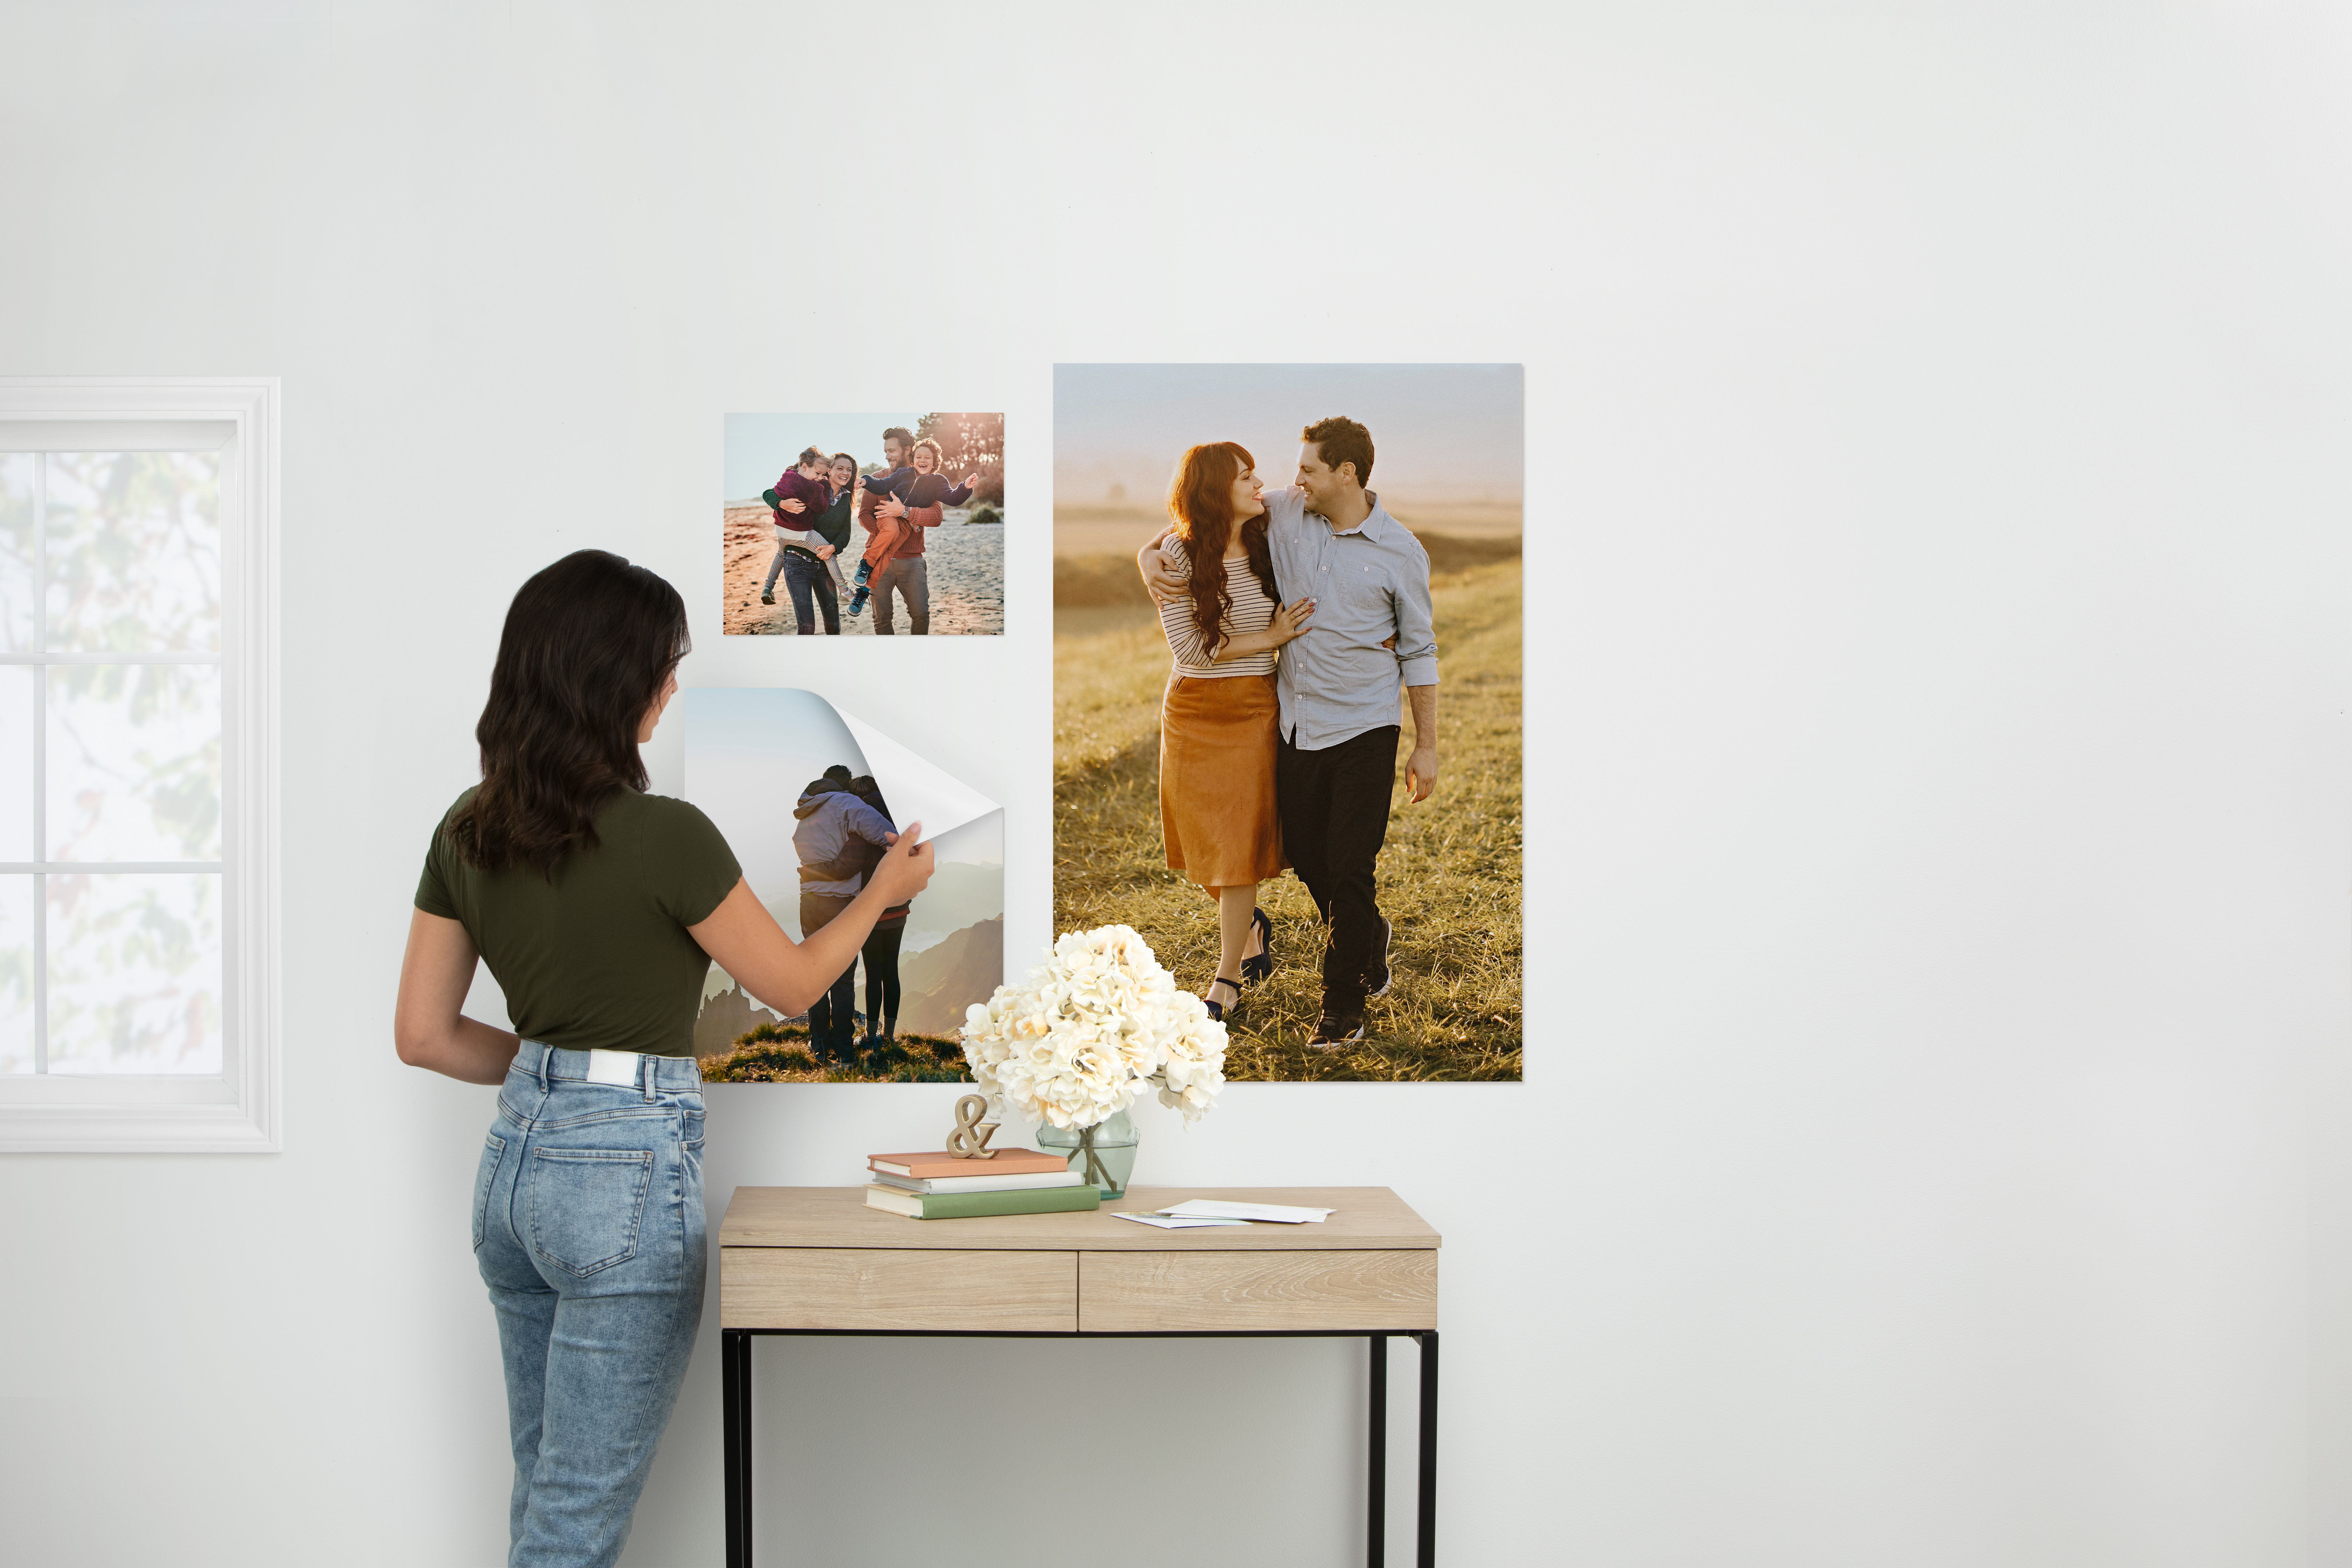 Happy Reunion 8x8 Picture Tiles | Mix Tiles Picture Frames Stick on Wall |  Photo Tiles Peel and Stick Picture Frames as Gallery Wall Frame Set (White